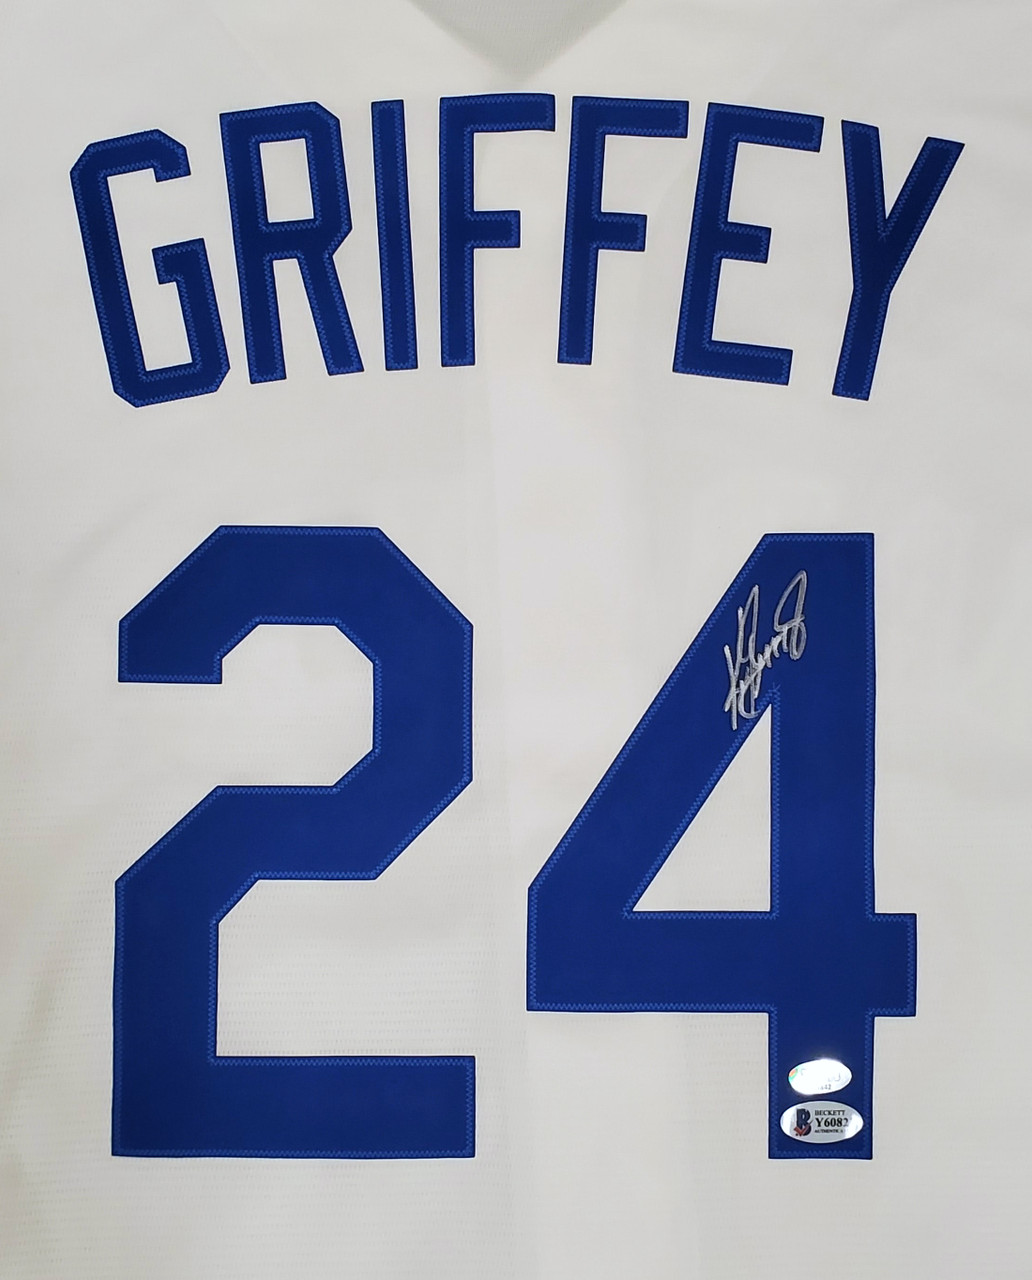 Autographed Ken Griffey Jr. Jersey - Red Mitchell & Ness Turn